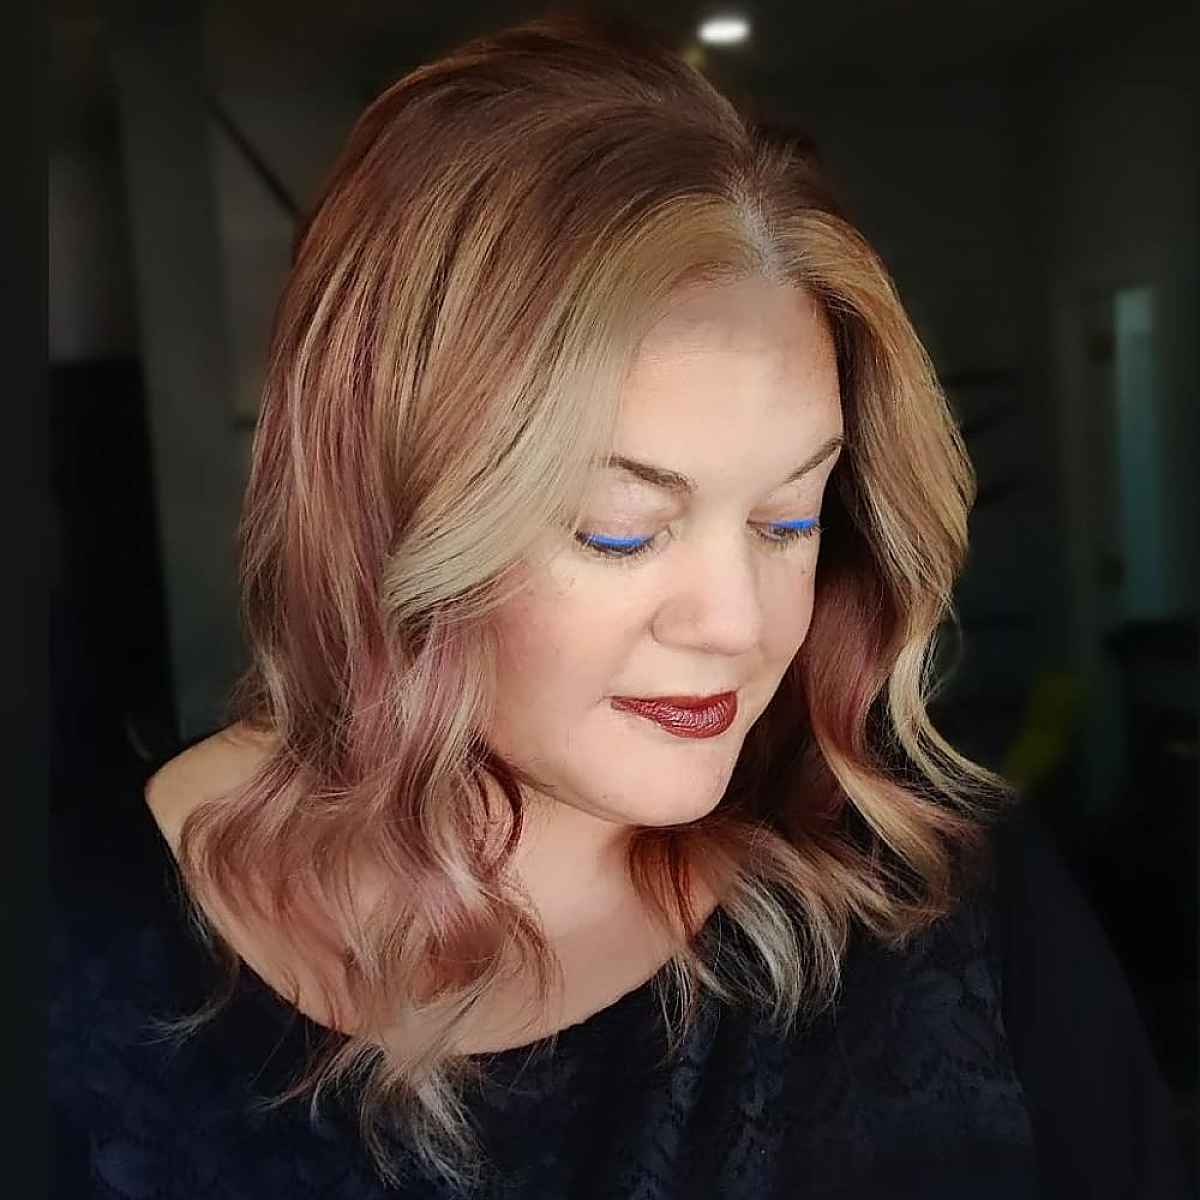 Top 10 Fall Hair Colors for Older Women in 2021